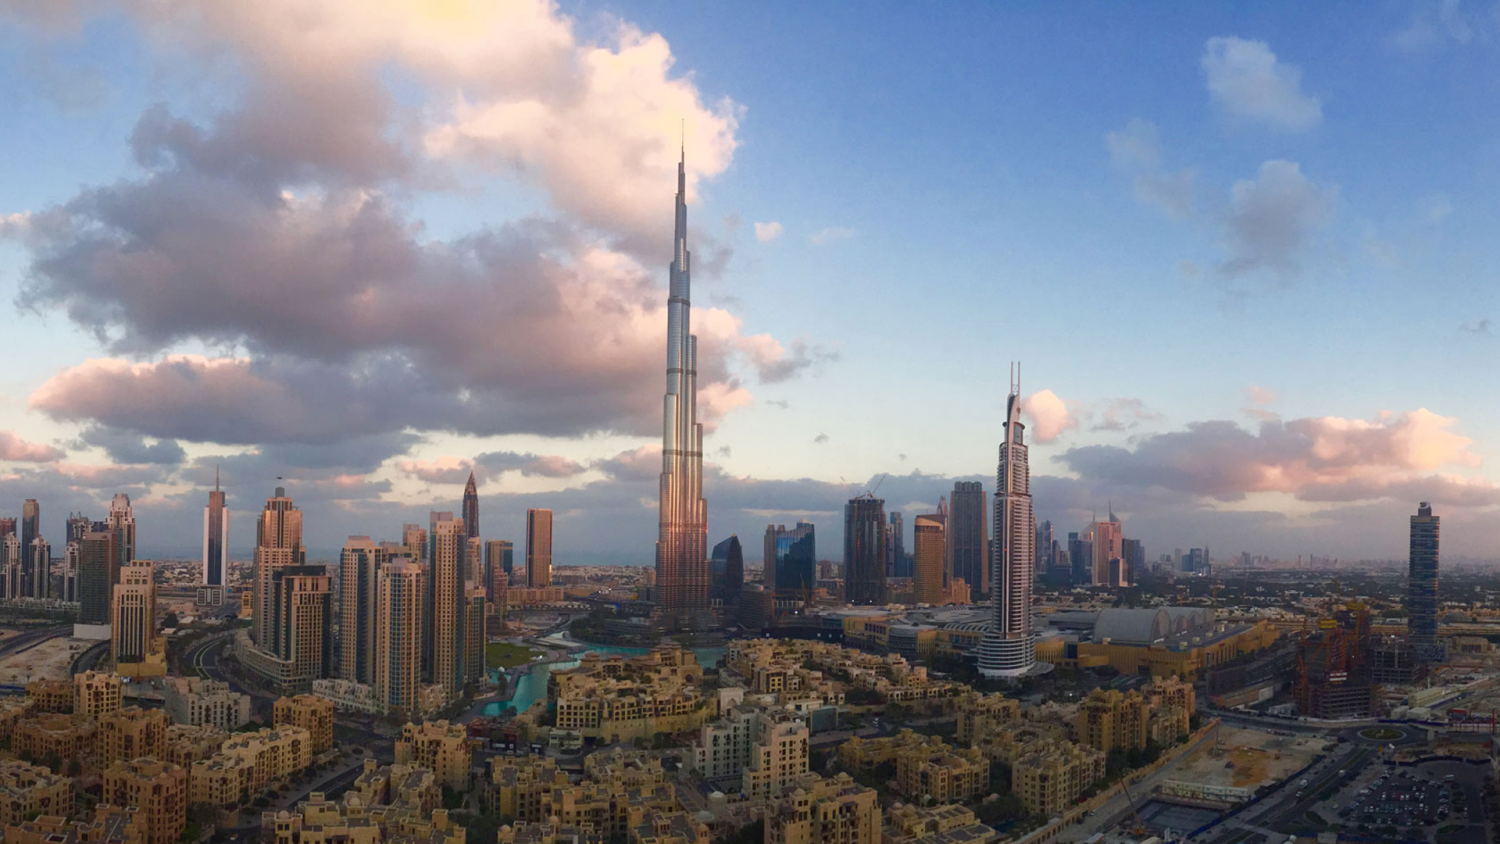 Shot by David K. in Dubai, United Arab Emirates as a part of Shot on iPhone 6 campaign